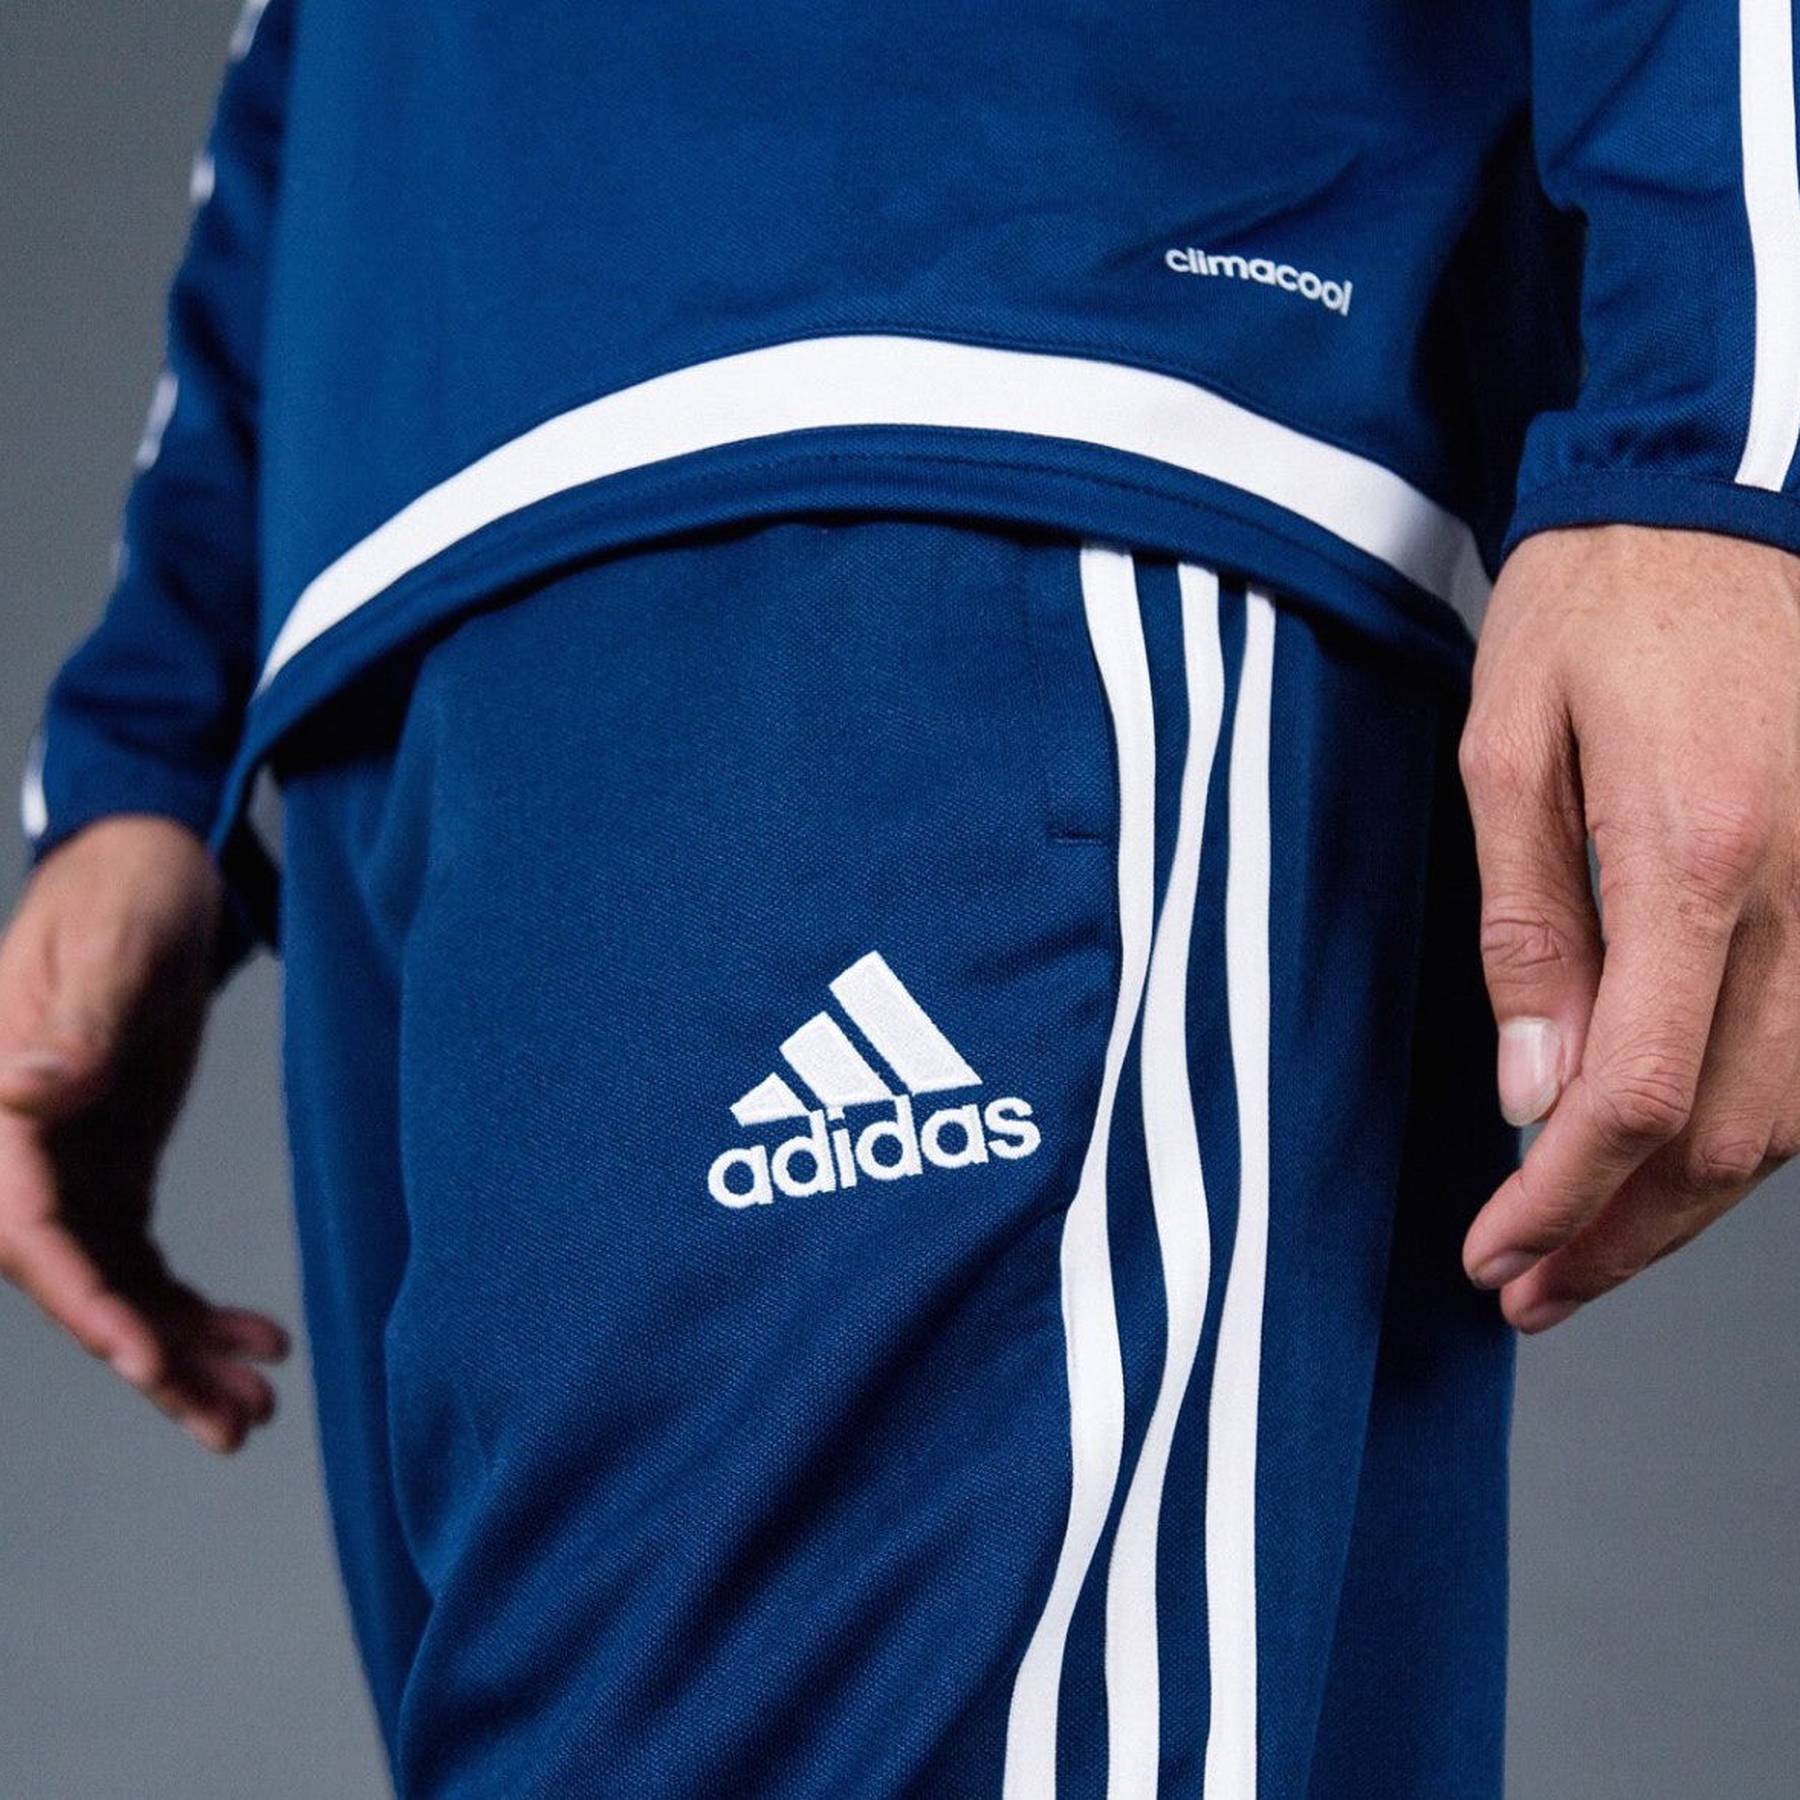 City flower Original Give rights Adidas Trademark War Means Three Stripes And You're Out | BoF